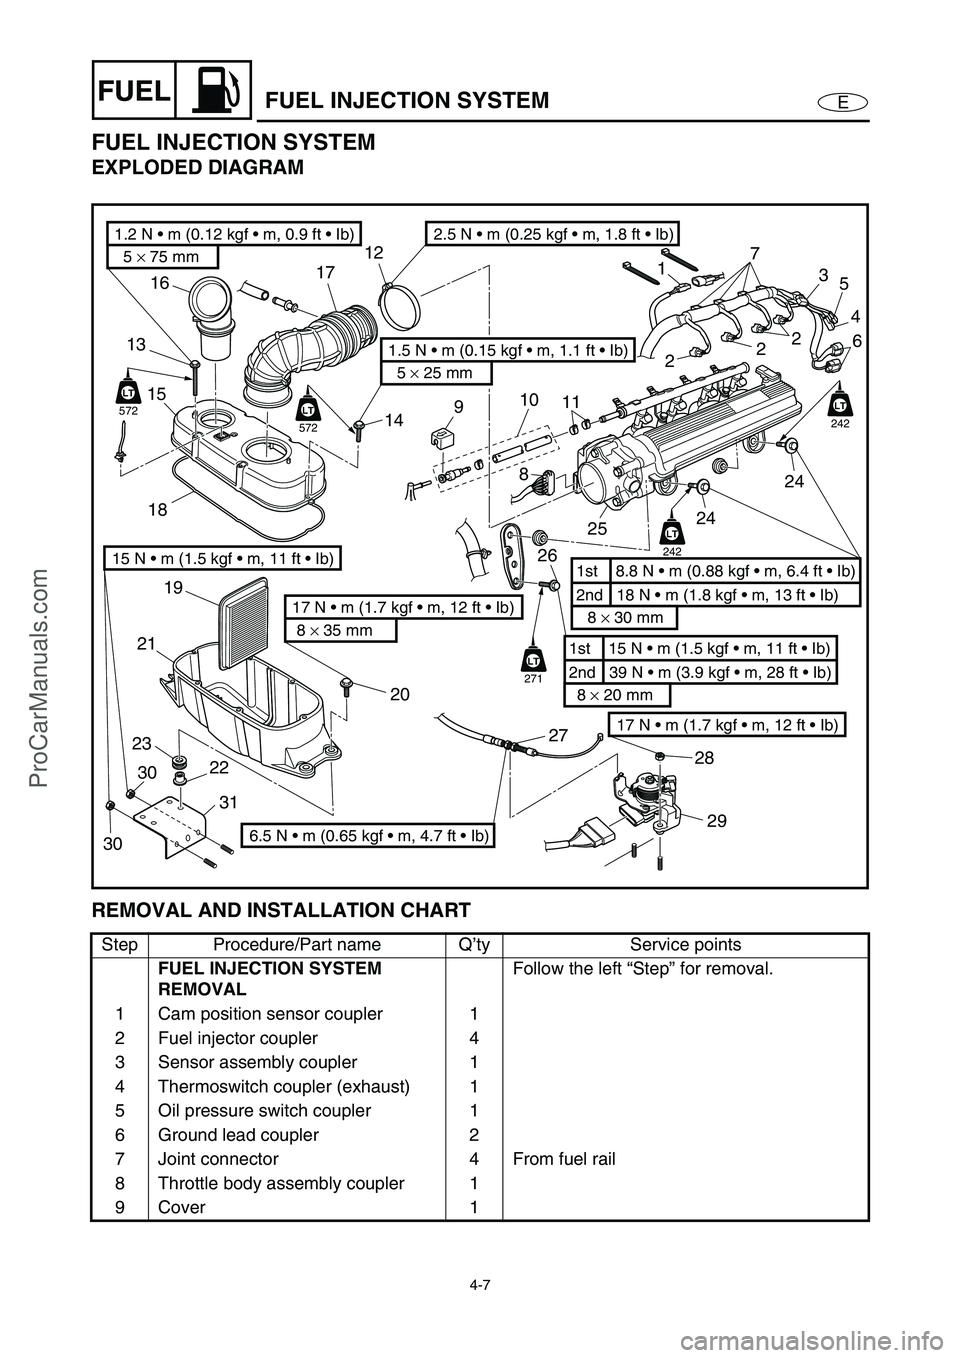 YAMAHA VX110 2005  Service Manual 4-7
EFUELFUEL INJECTION SYSTEM
FUEL INJECTION SYSTEM
EXPLODED DIAGRAM
REMOVAL AND INSTALLATION CHART
Step Procedure/Part name Q’ty Service points
FUEL INJECTION SYSTEM 
REMOVALFollow the left “Ste